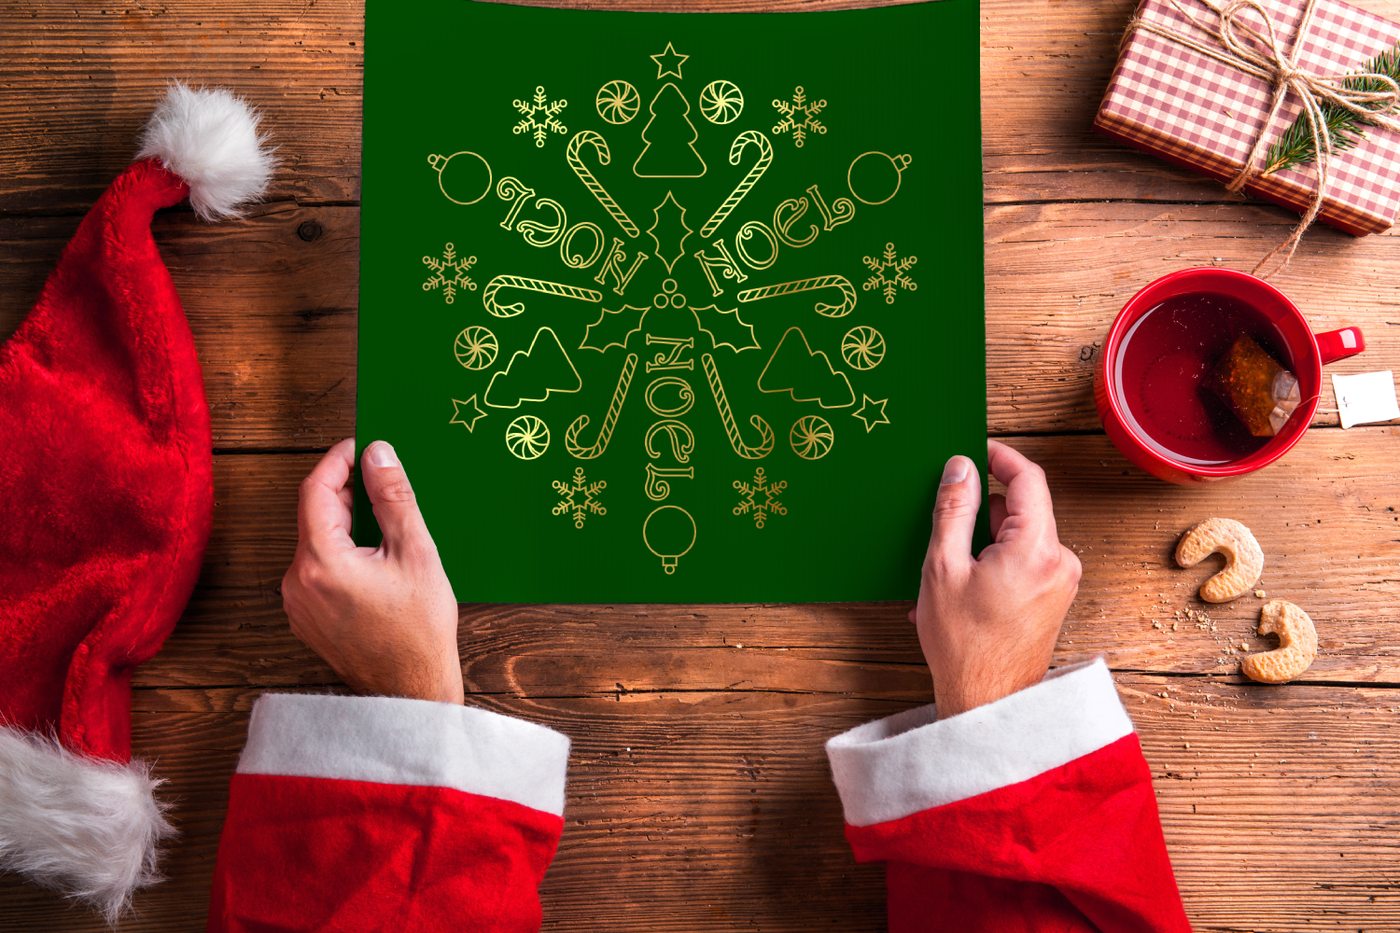 A white person dressed as Santa with only their arms visible holds out a large square piece of green paper. A Santa hat and gift lay to the side. The paper is decorated with the word NOEL and various Christmas icons in gold set on a circle.